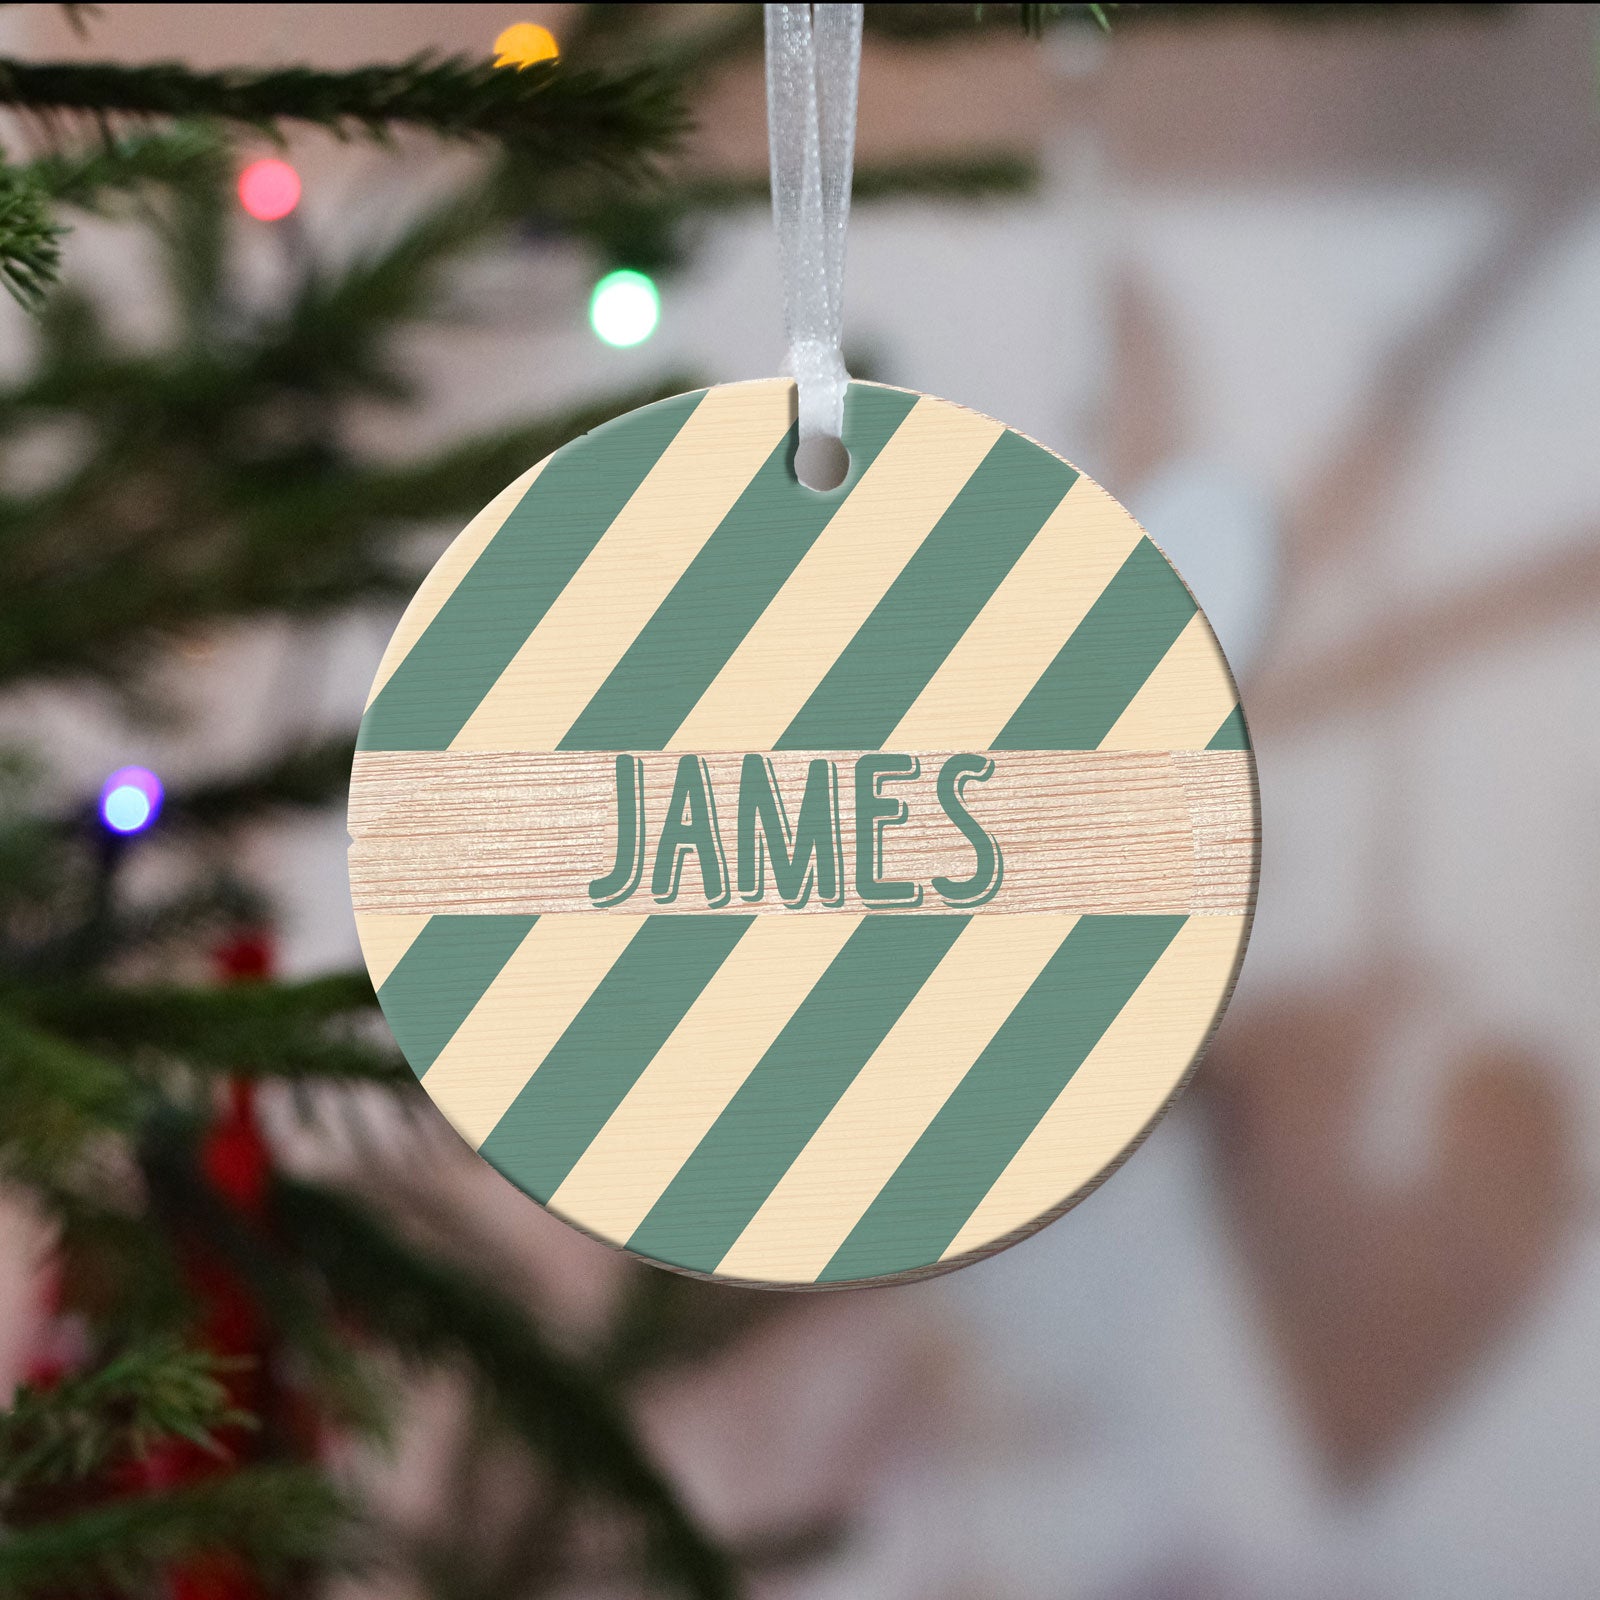 Personalised Wooden Christmas Ornaments Printed- Handcrafted Decoration Baubles, Ideal for Festive Season, Perfect Gift Option